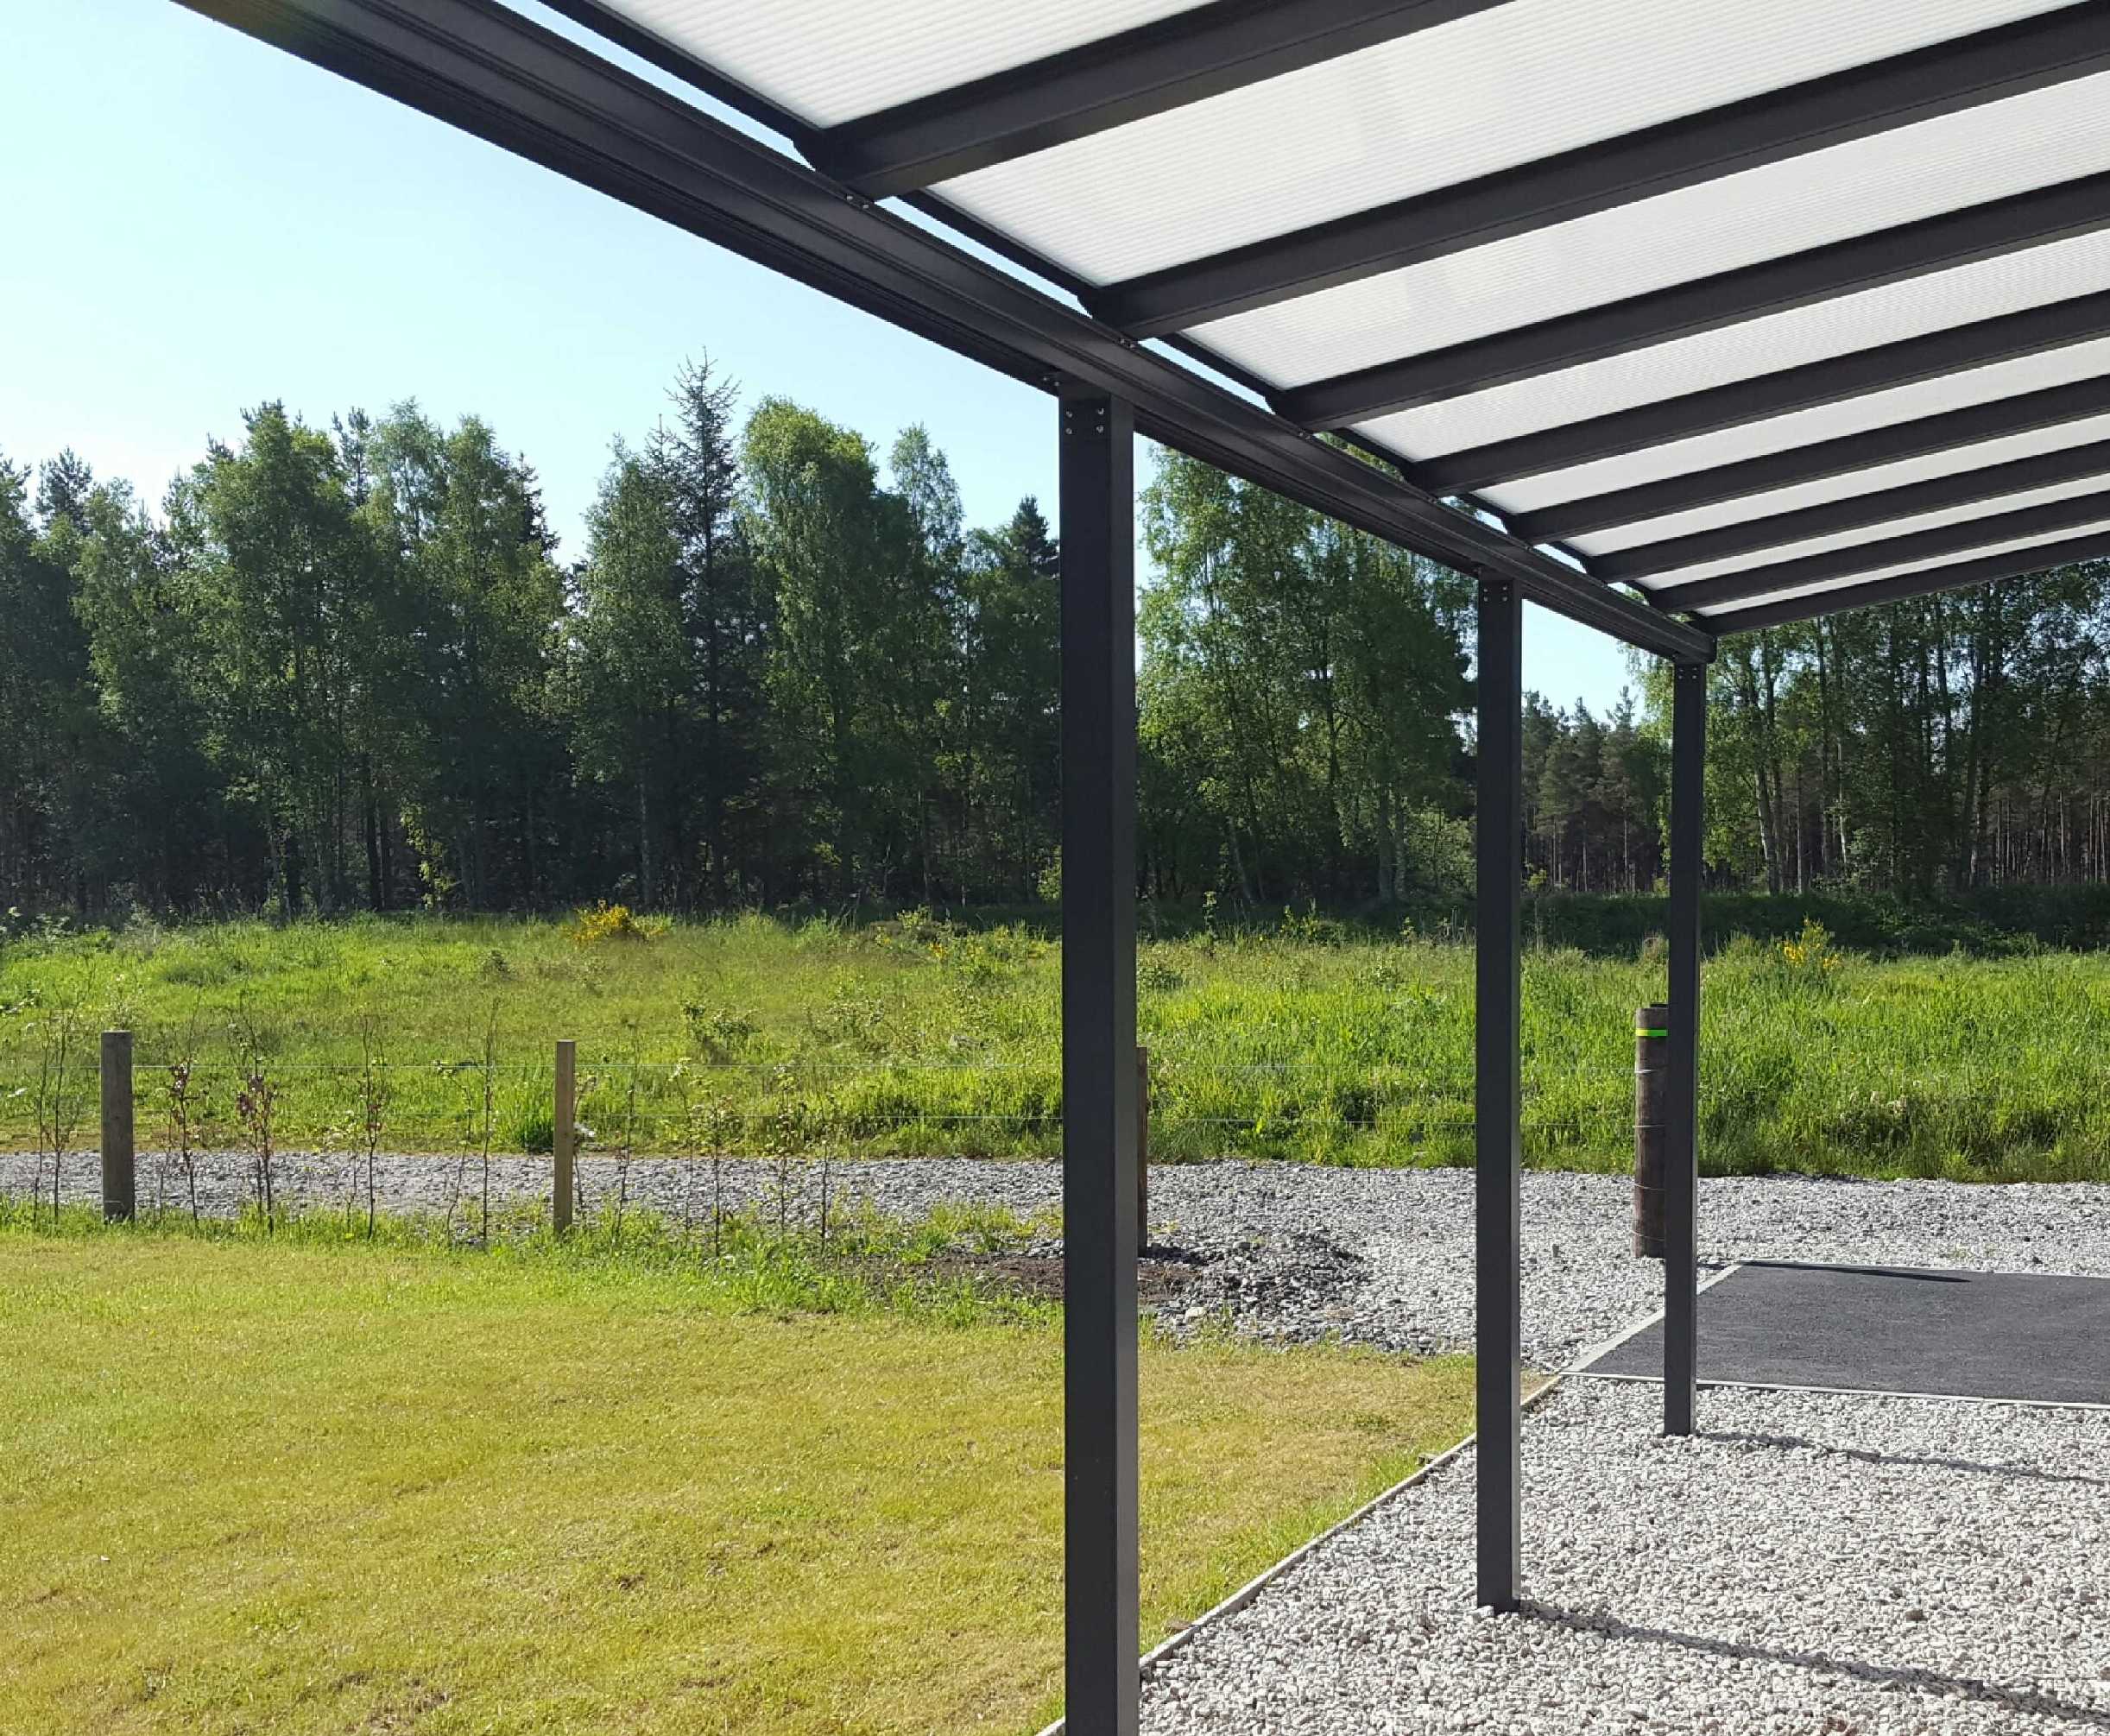 Omega Smart Lean-To Canopy, Anthracite Grey, UNGLAZED for 6mm Glazing - 9.1m (W) x 1.5m (P), (5) Supporting Posts